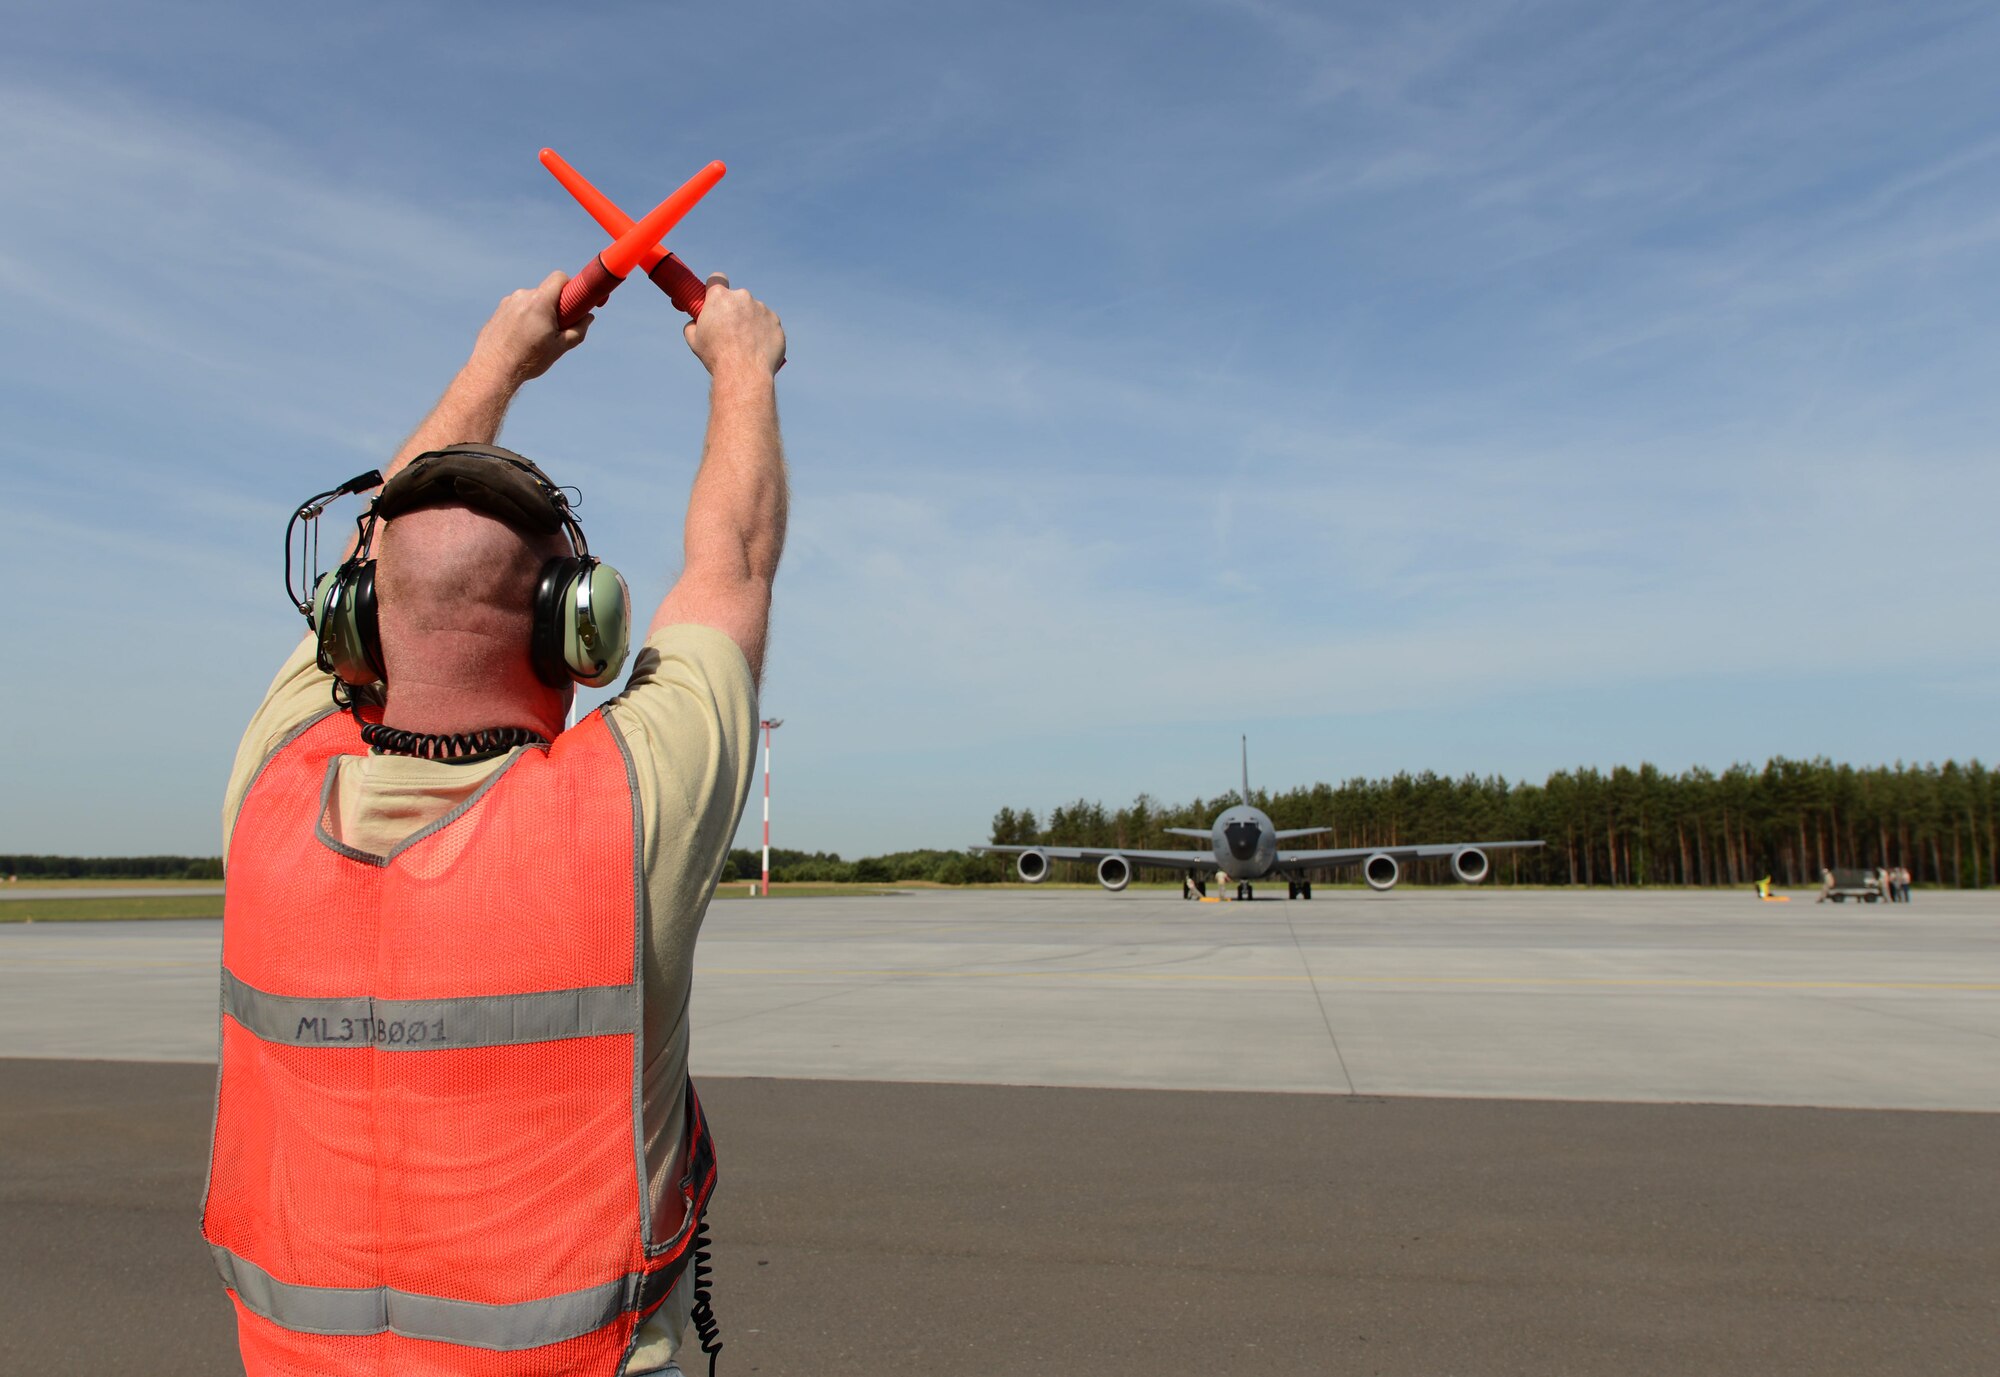 U.S. Air Force Tech. Sgt. Michael Mackey, 351st Expeditionary Air Refueling Squadron-Poland instrument and flight control systems craftsman from Indianapolis, guides a KC-135 Stratotanker as it taxis toward the runway June 11, 2014, for a Baltic Operations Exercise mission out of Powidz Air Base, Poland. The BALTOPS Exercise provides the opportunity for personnel of participating nations to engage in realistic training to build experience, teamwork and strengthen interoperability while working toward mutual goals. (U.S. Air Force photo/Airman 1st Class Kyla Gifford/Released)